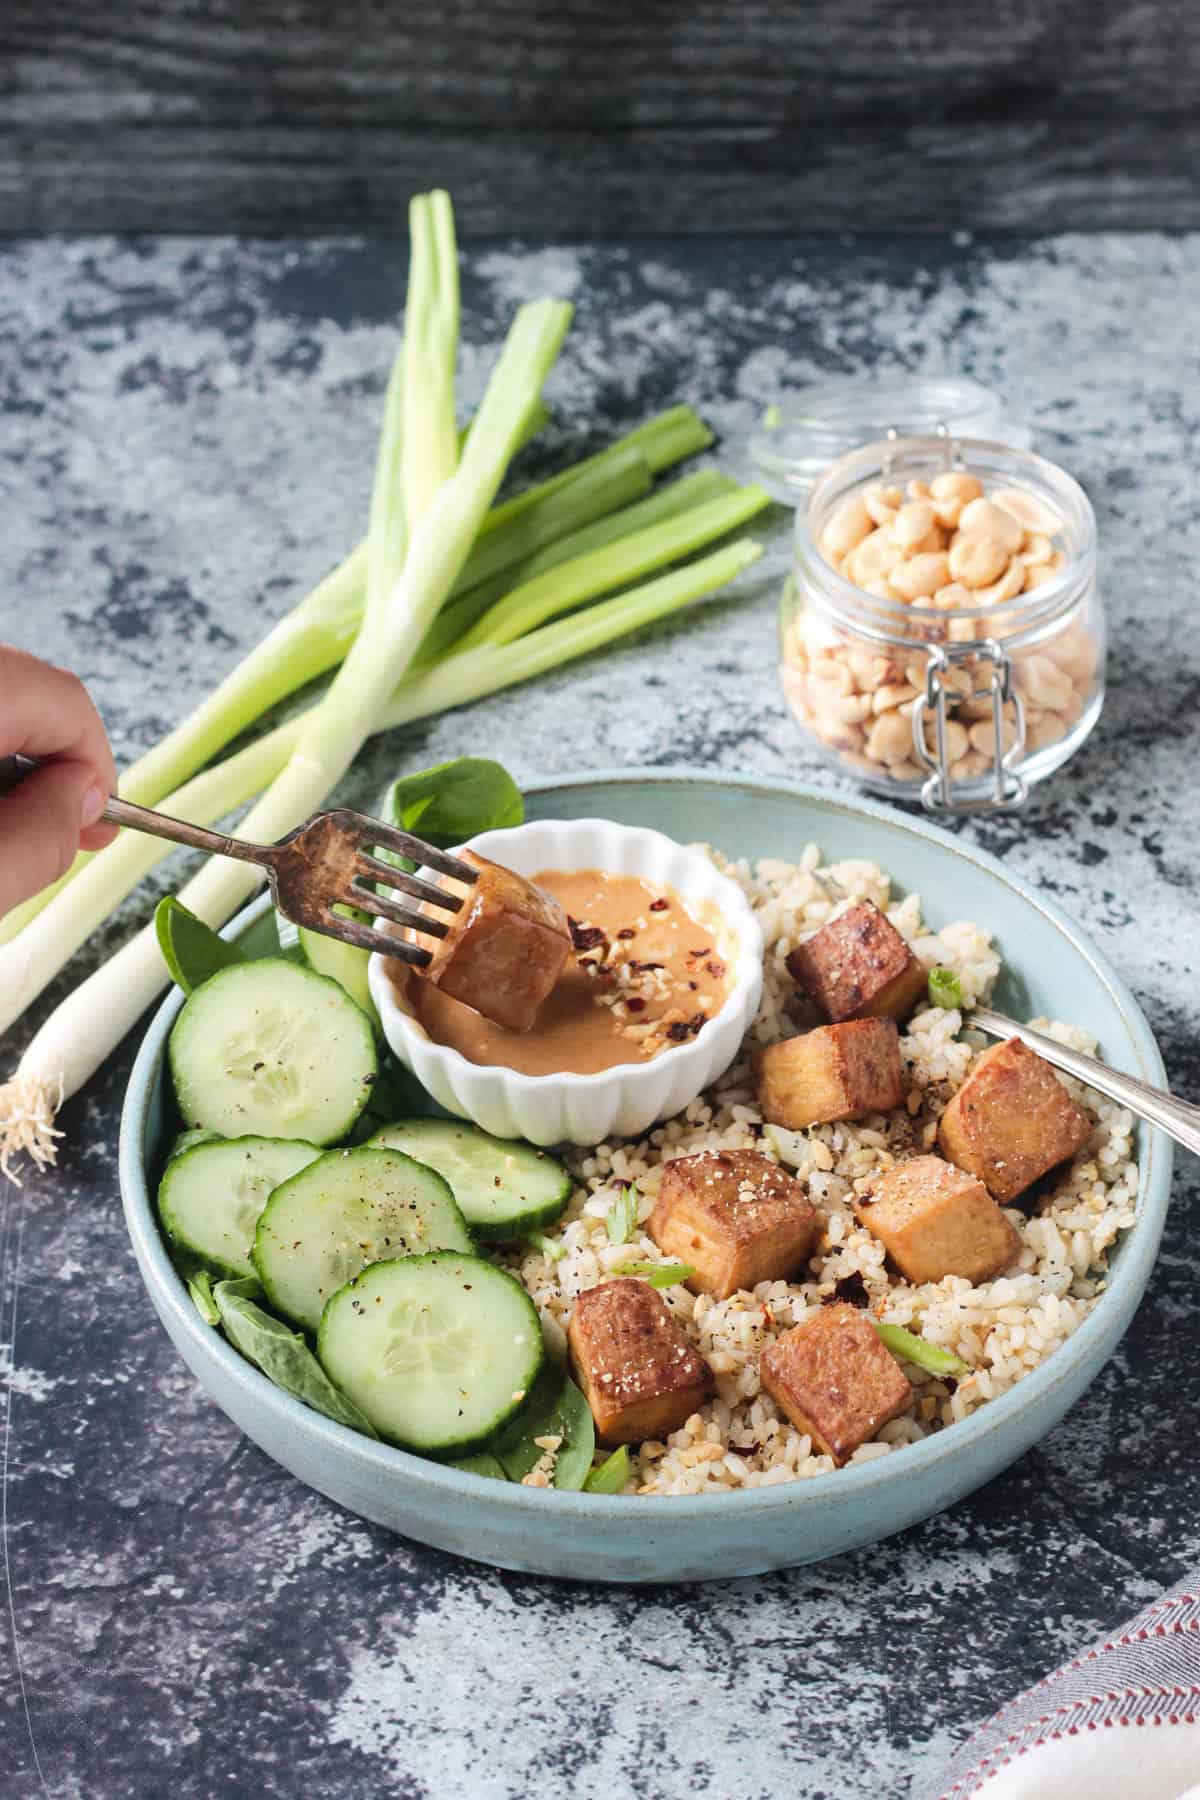 Bite of baked tofu being dipped into a small bowl of peanut sauce.